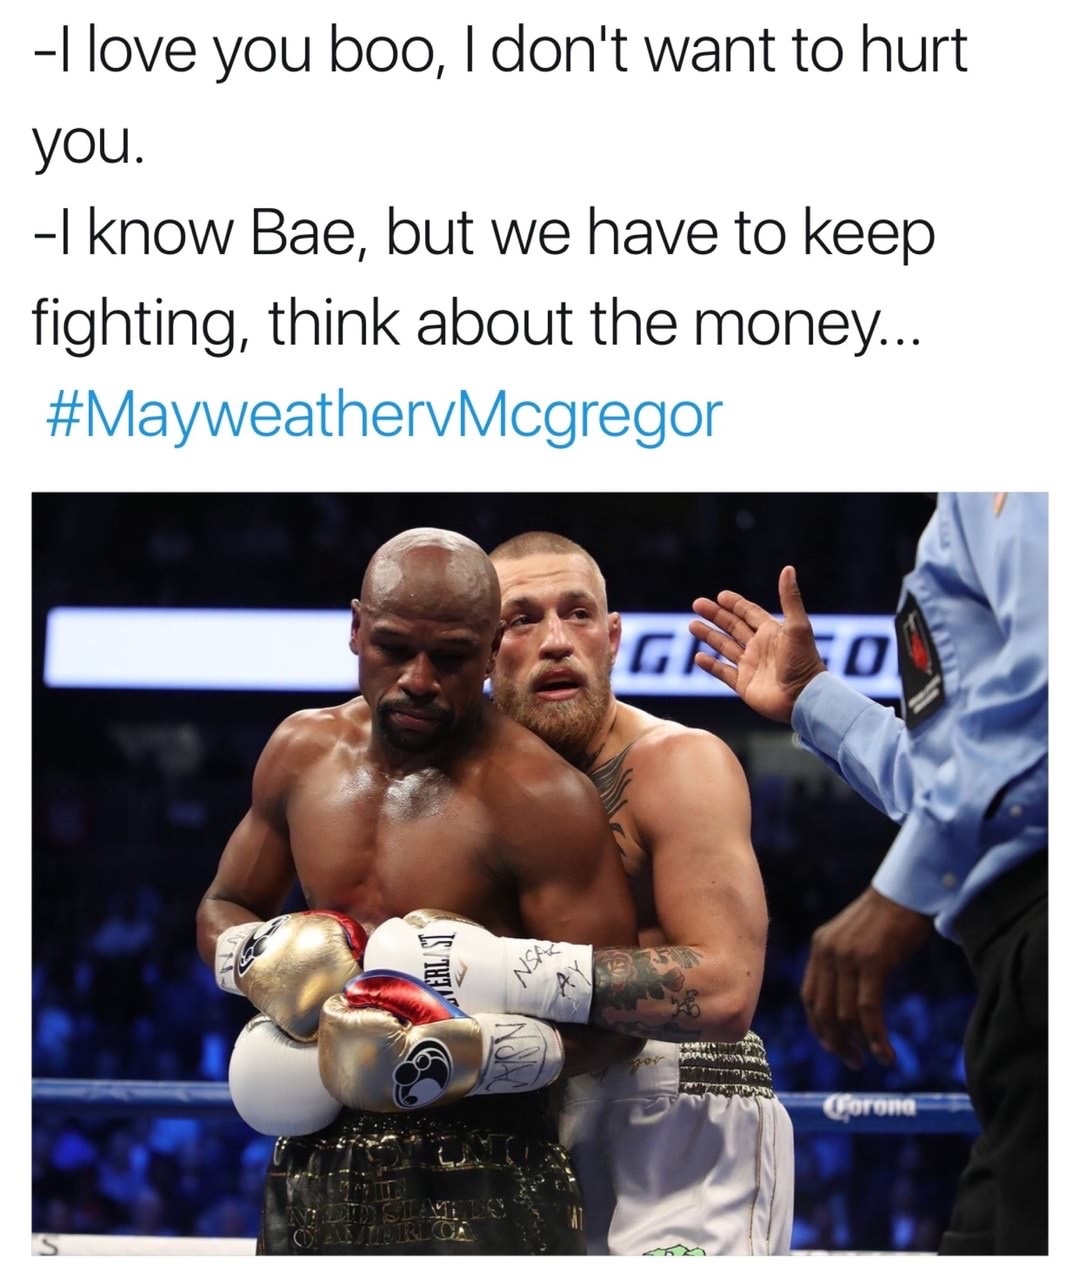 conor mcgregor floyd mayweather - I love you boo, I don't want to hurt you. I know Bae, but we have to keep fighting, think about the money... Corona